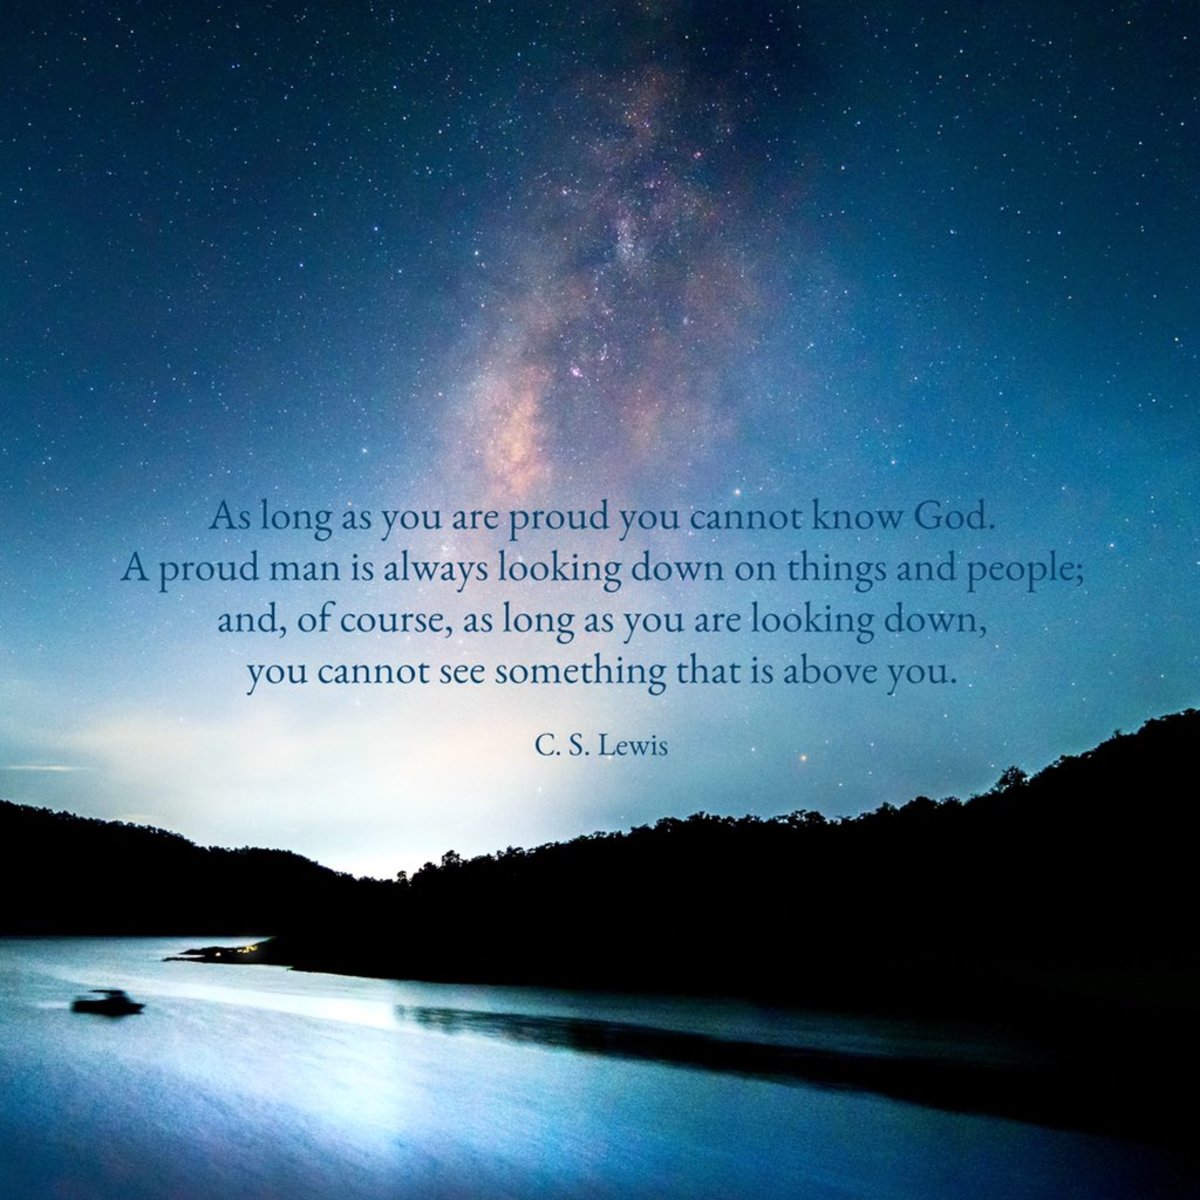 C.S. Lewis  Quotes On Self How Wise 